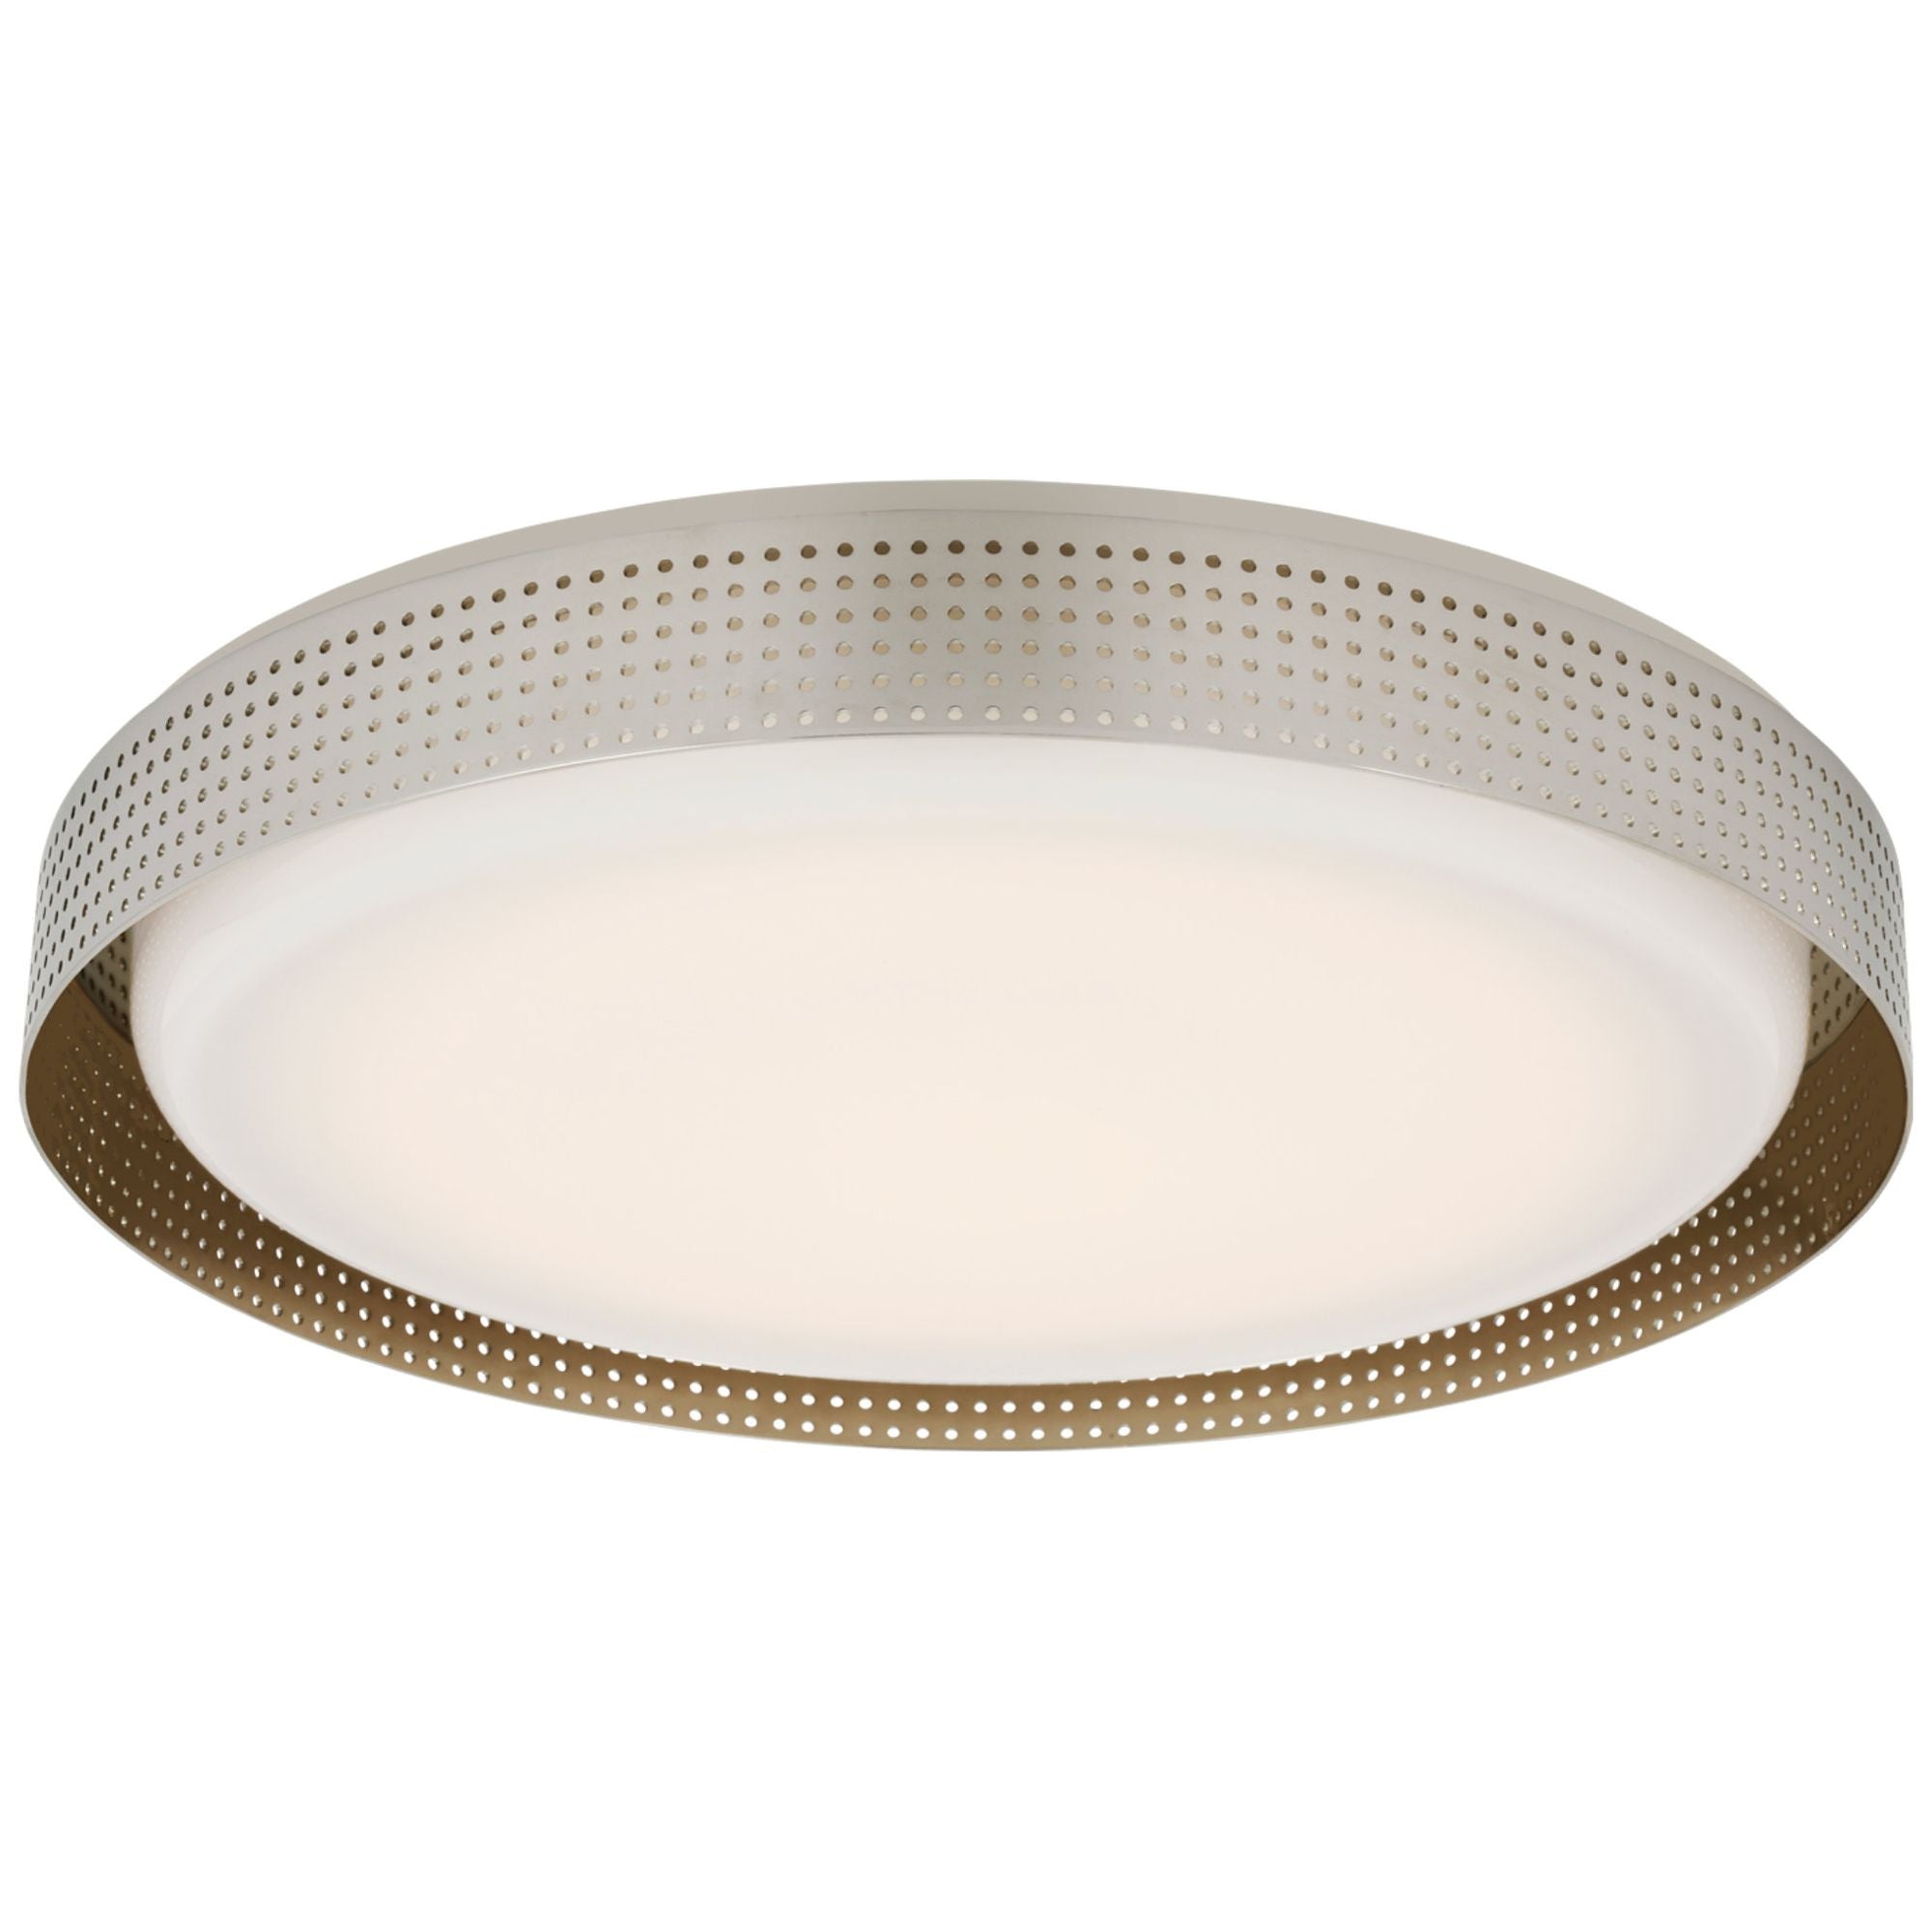 Kelly Wearstler Precision 18" Round Flush Mount in Polished Nickel with White Glass